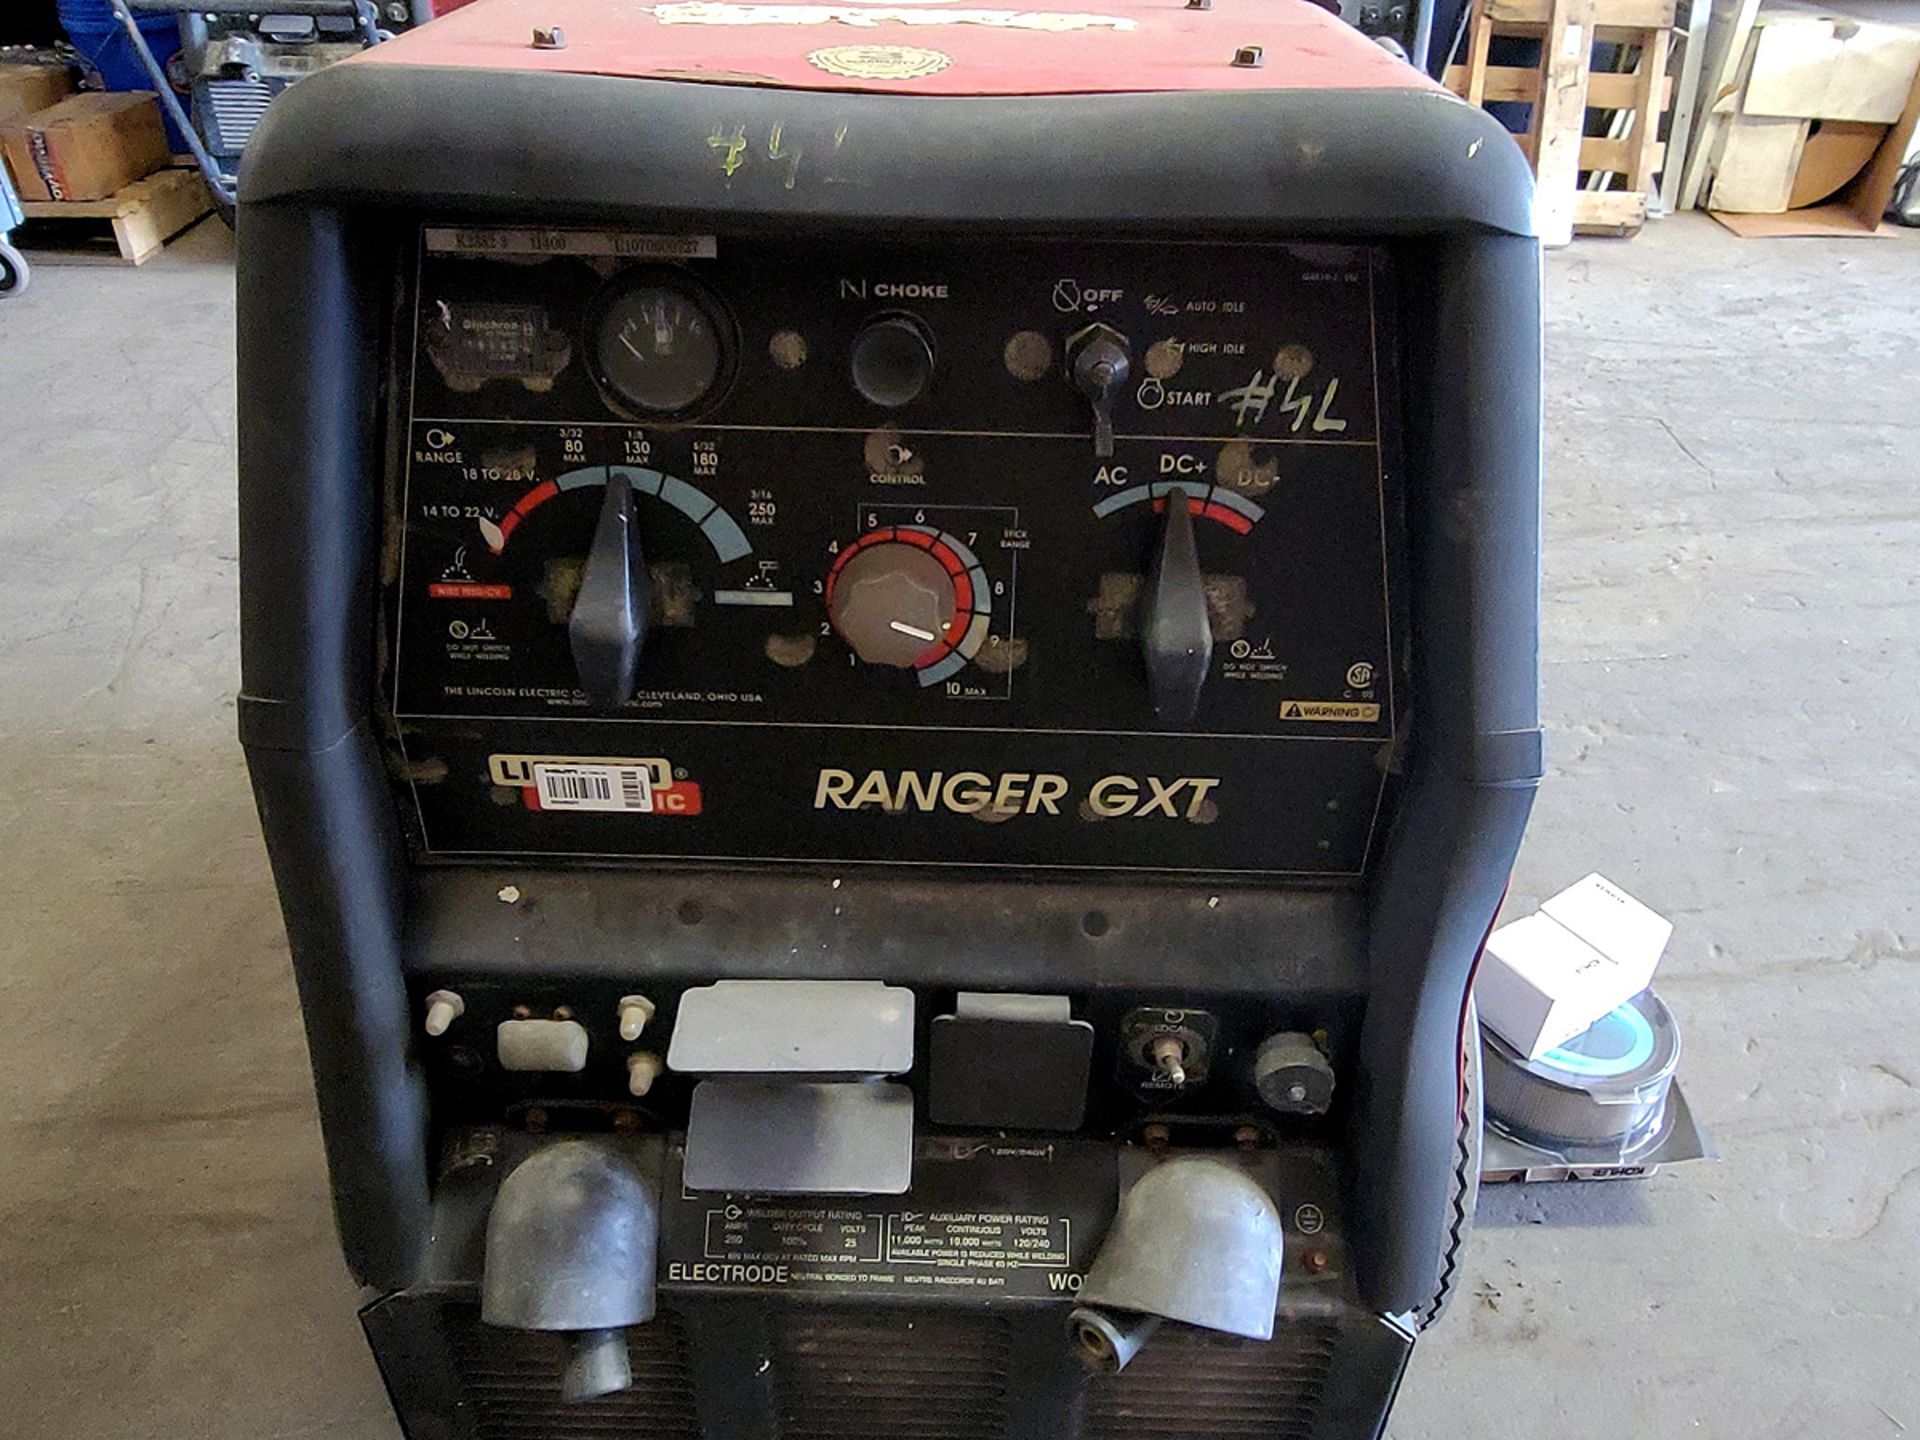 Lincoln Ranger GXT Engine Driven Welder Mounted on Portable Cart - Image 3 of 5